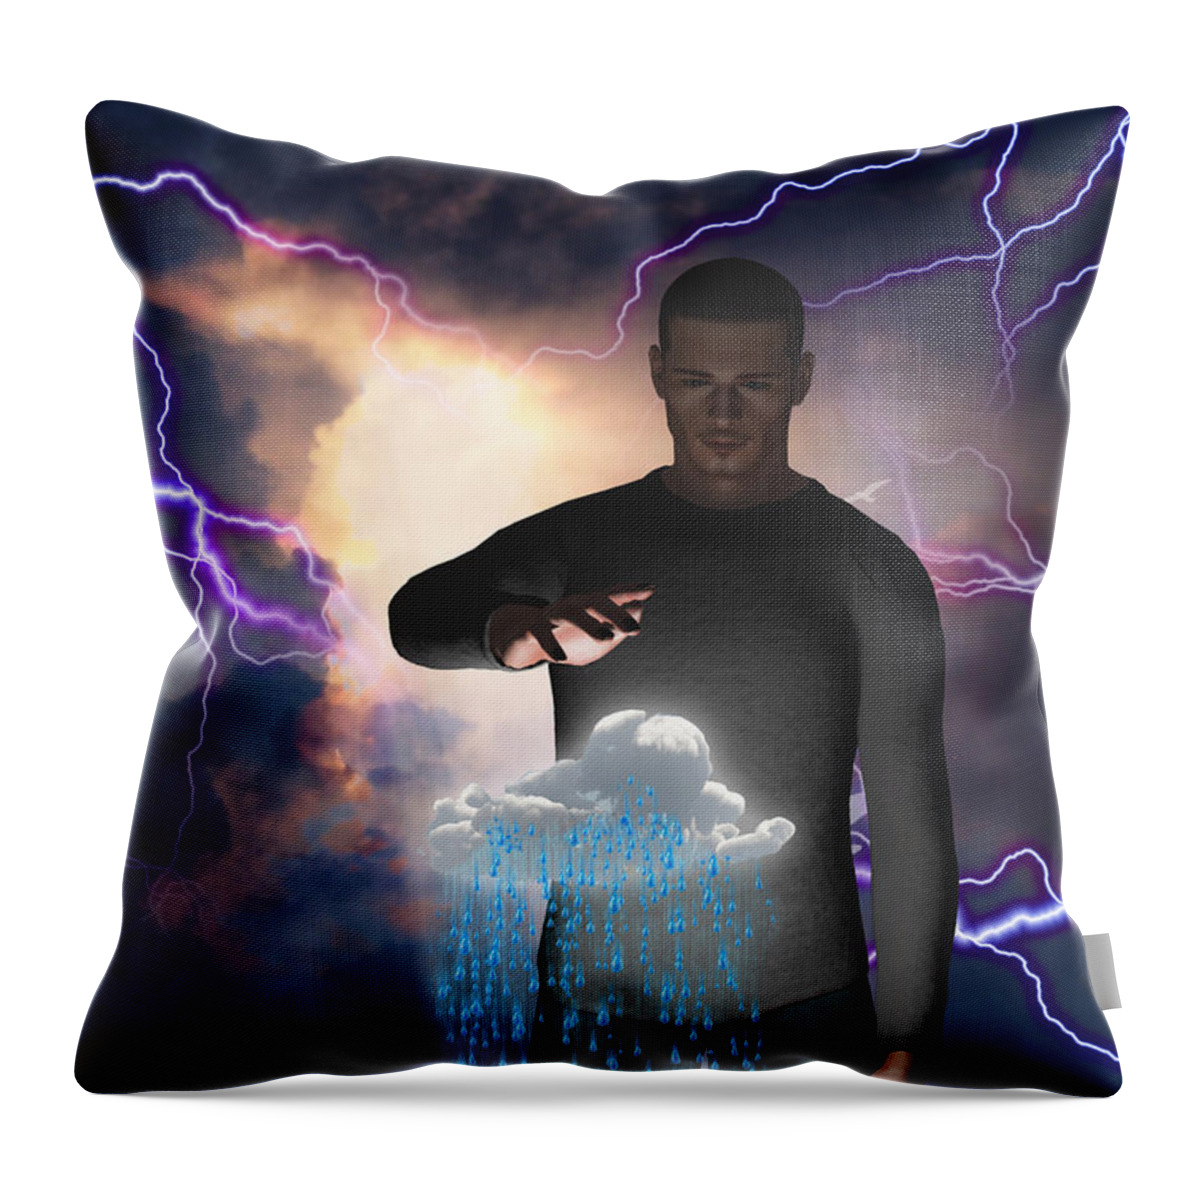 Powerful Throw Pillow featuring the digital art The Rainmaker by Bruce Rolff